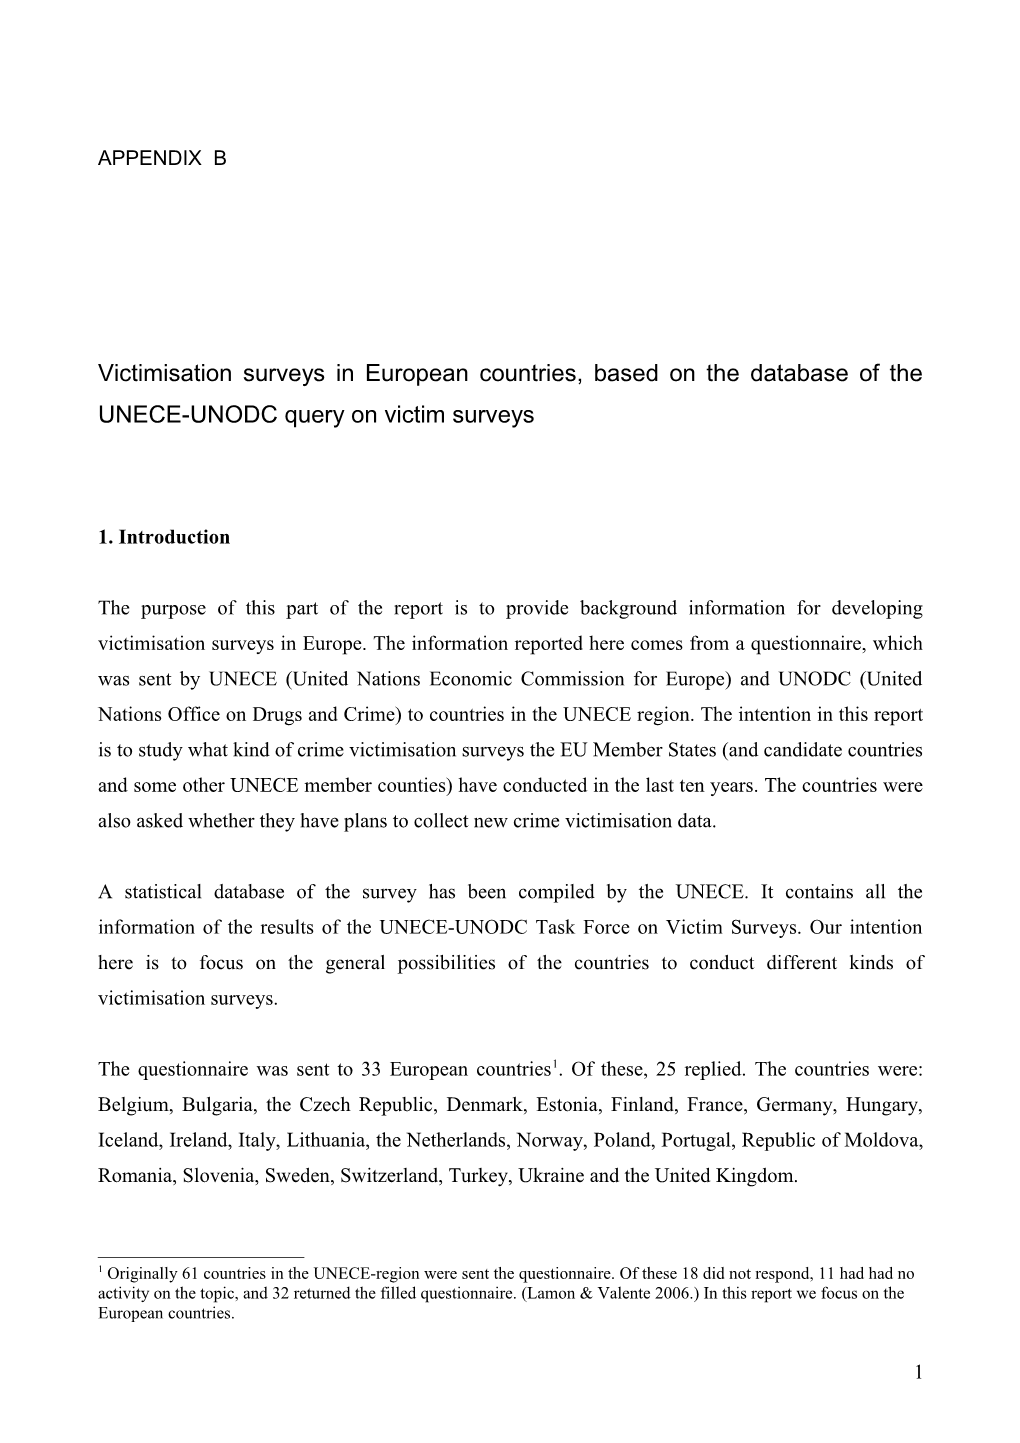 Victimisation Surveys in European Countries, Based on the Database of the UNECE-UNODC Query